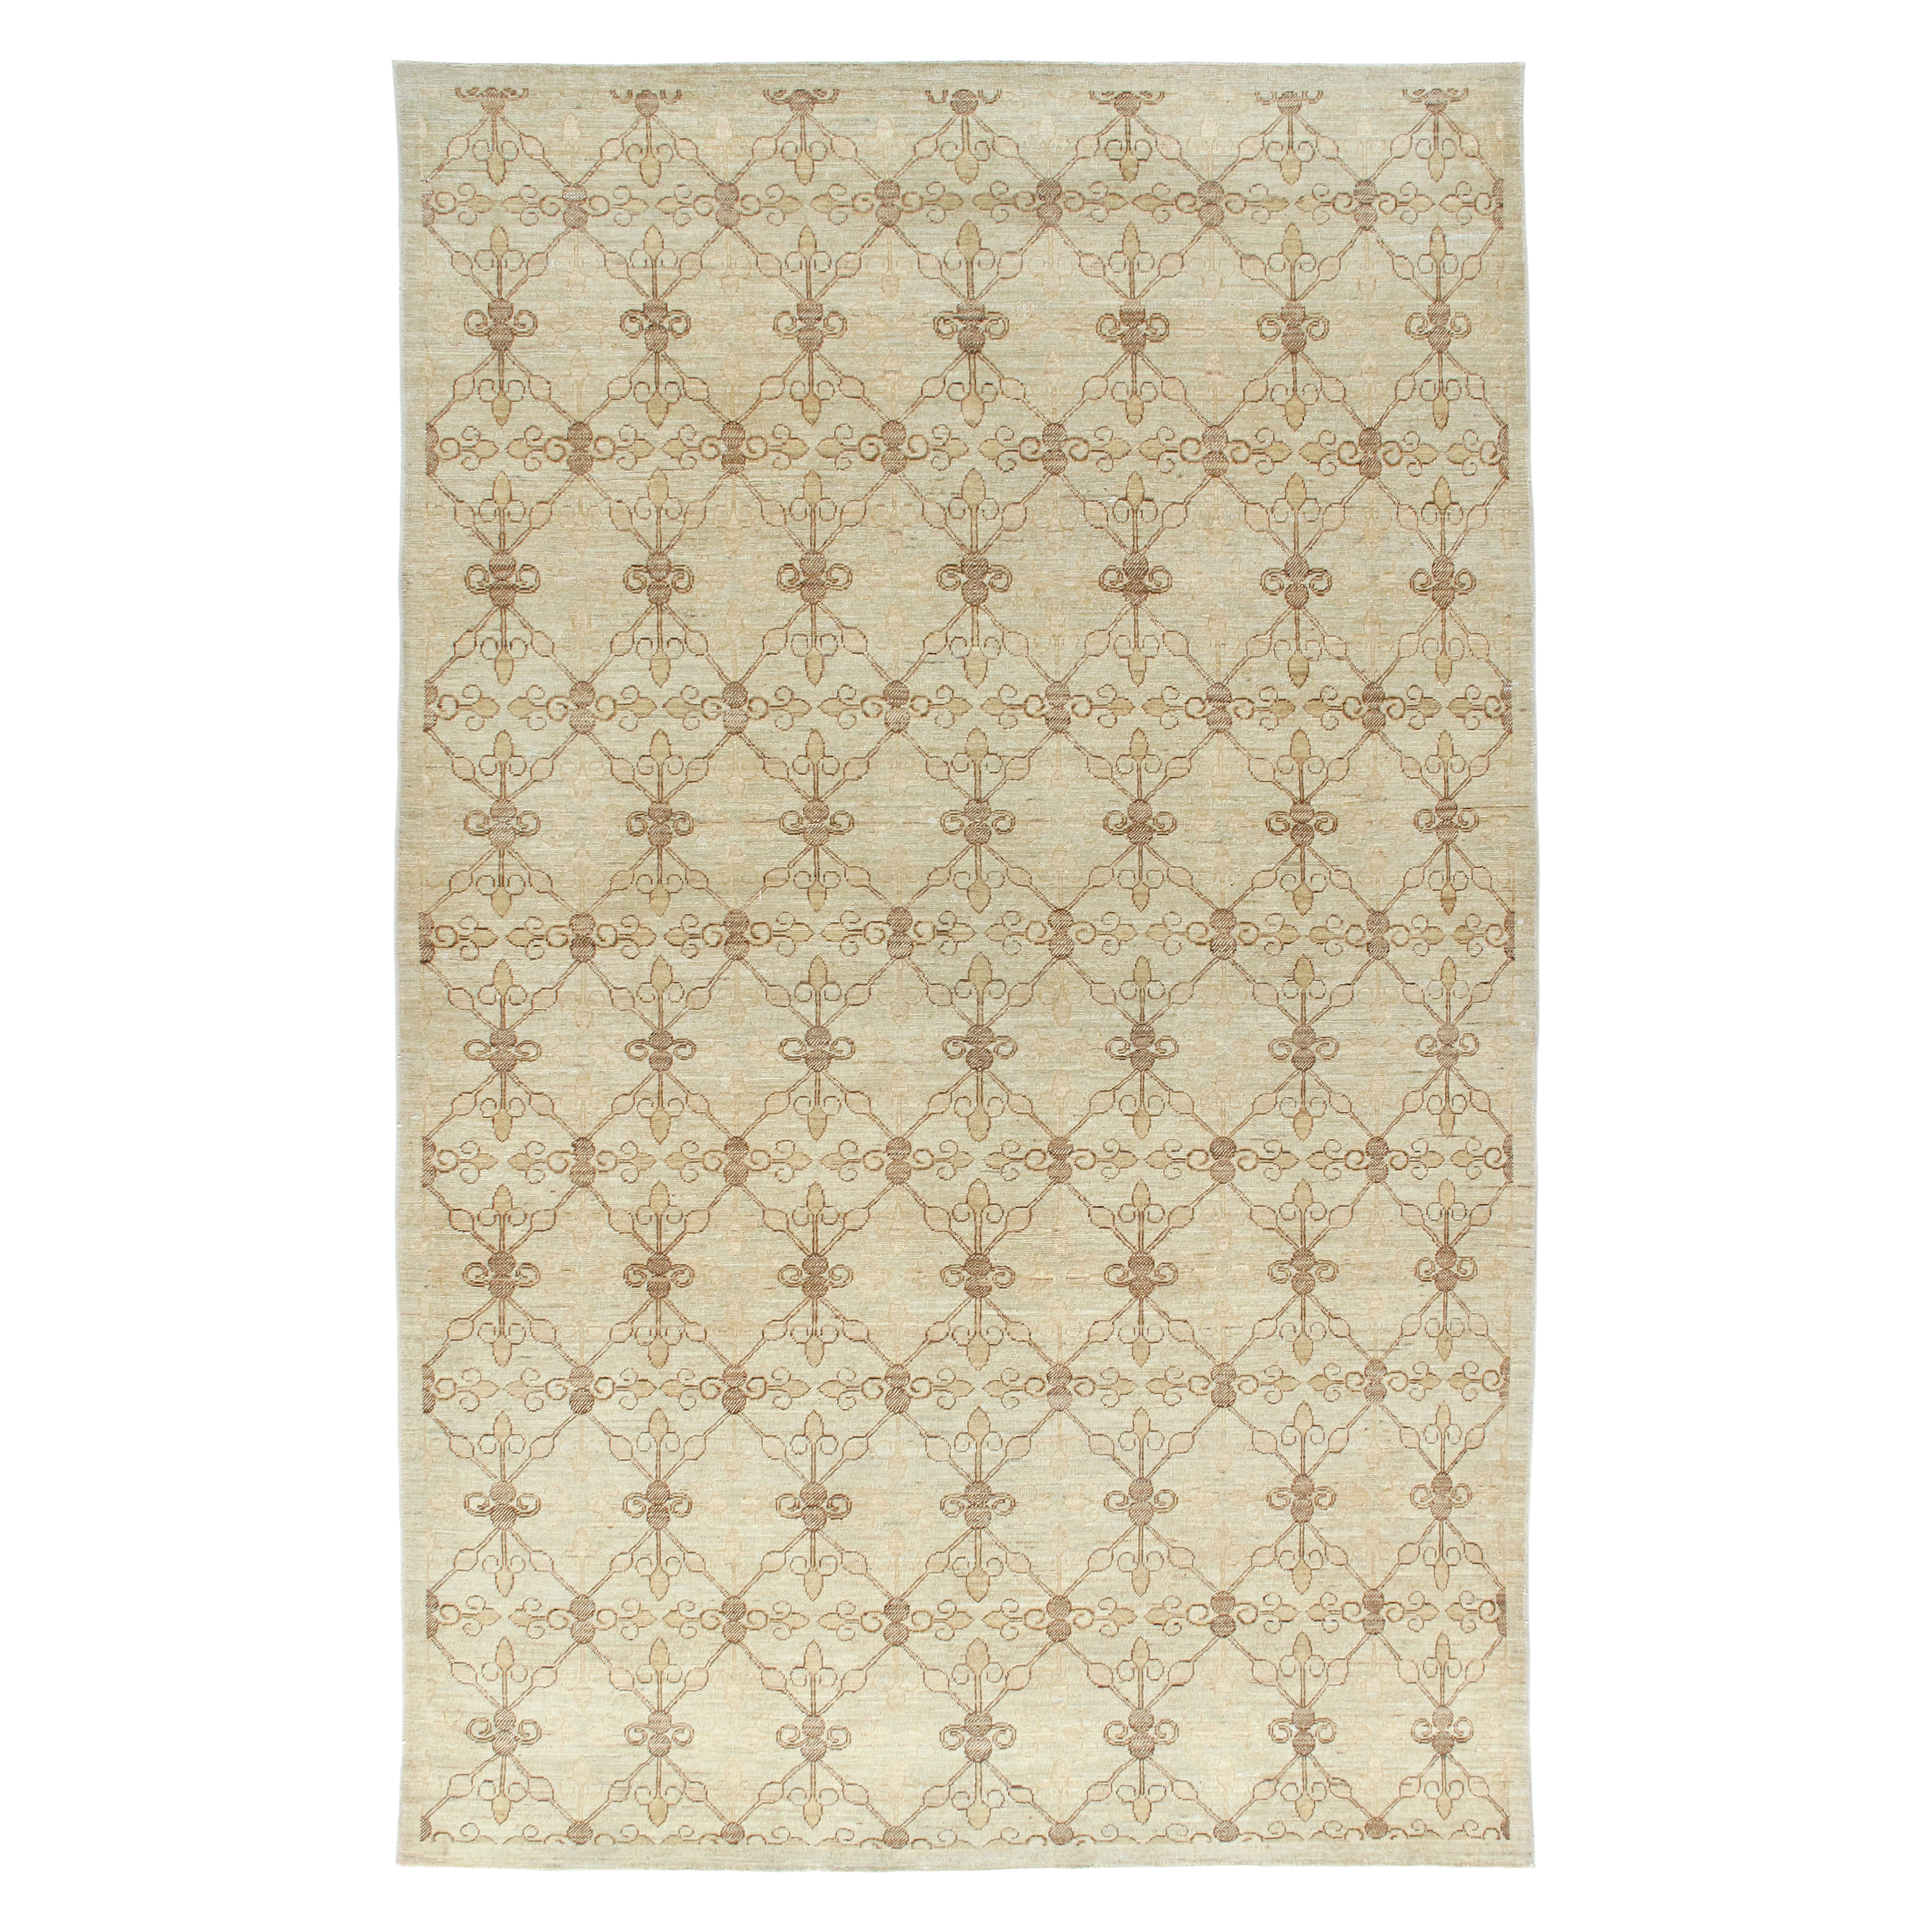 This Decorative European Rug is hand-knotted and made of 100% wool.